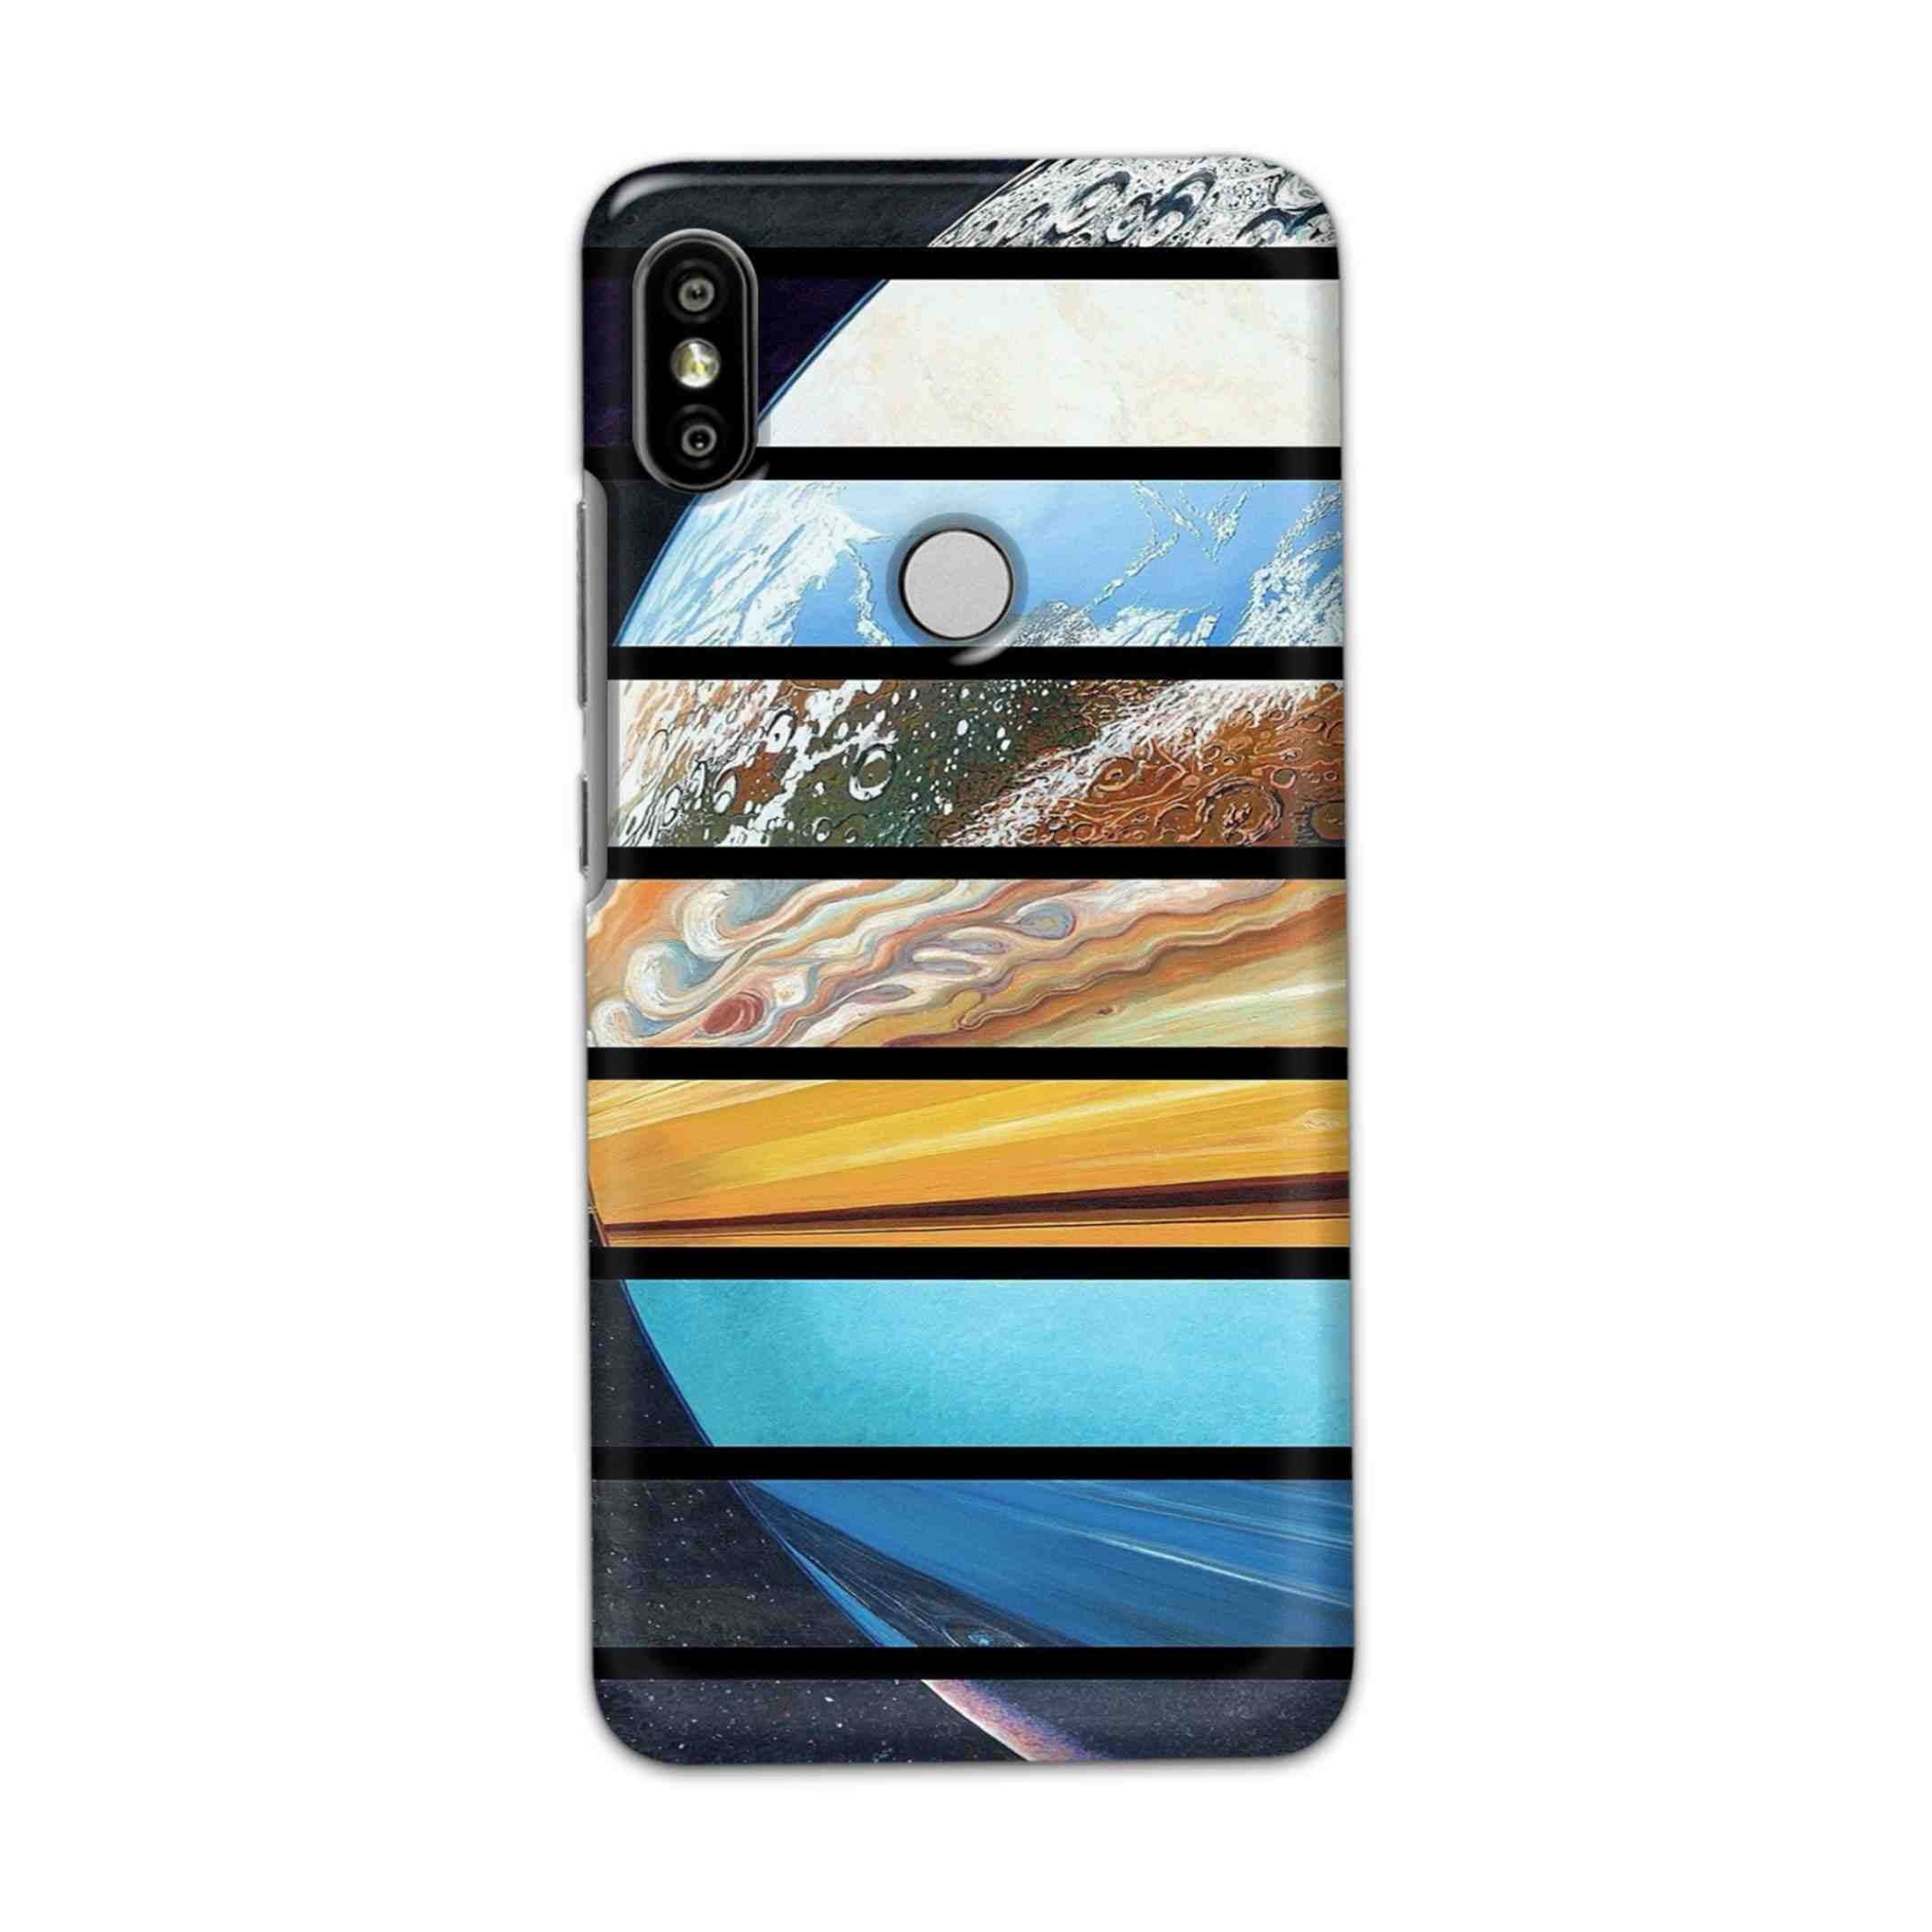 Buy Colourful Earth Hard Back Mobile Phone Case Cover For Redmi S2 / Y2 Online